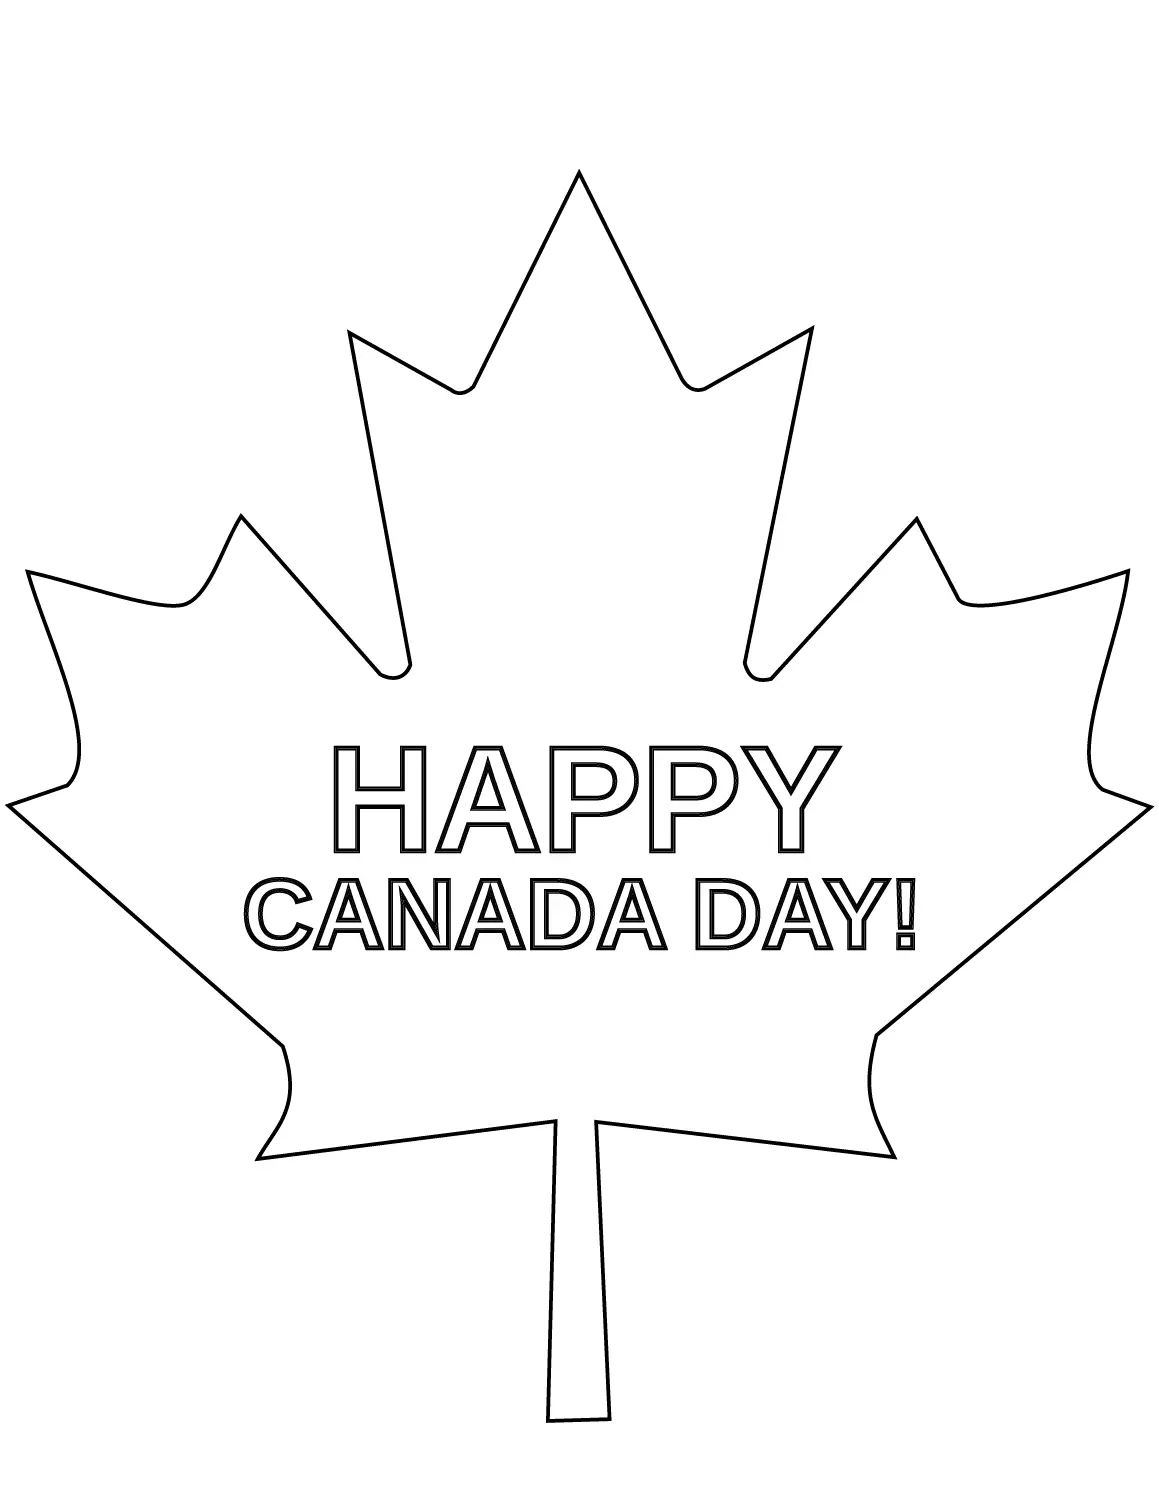 Canada Day Free Clipart Public Domain Coloring Pages Line Art Drawings for Kids-